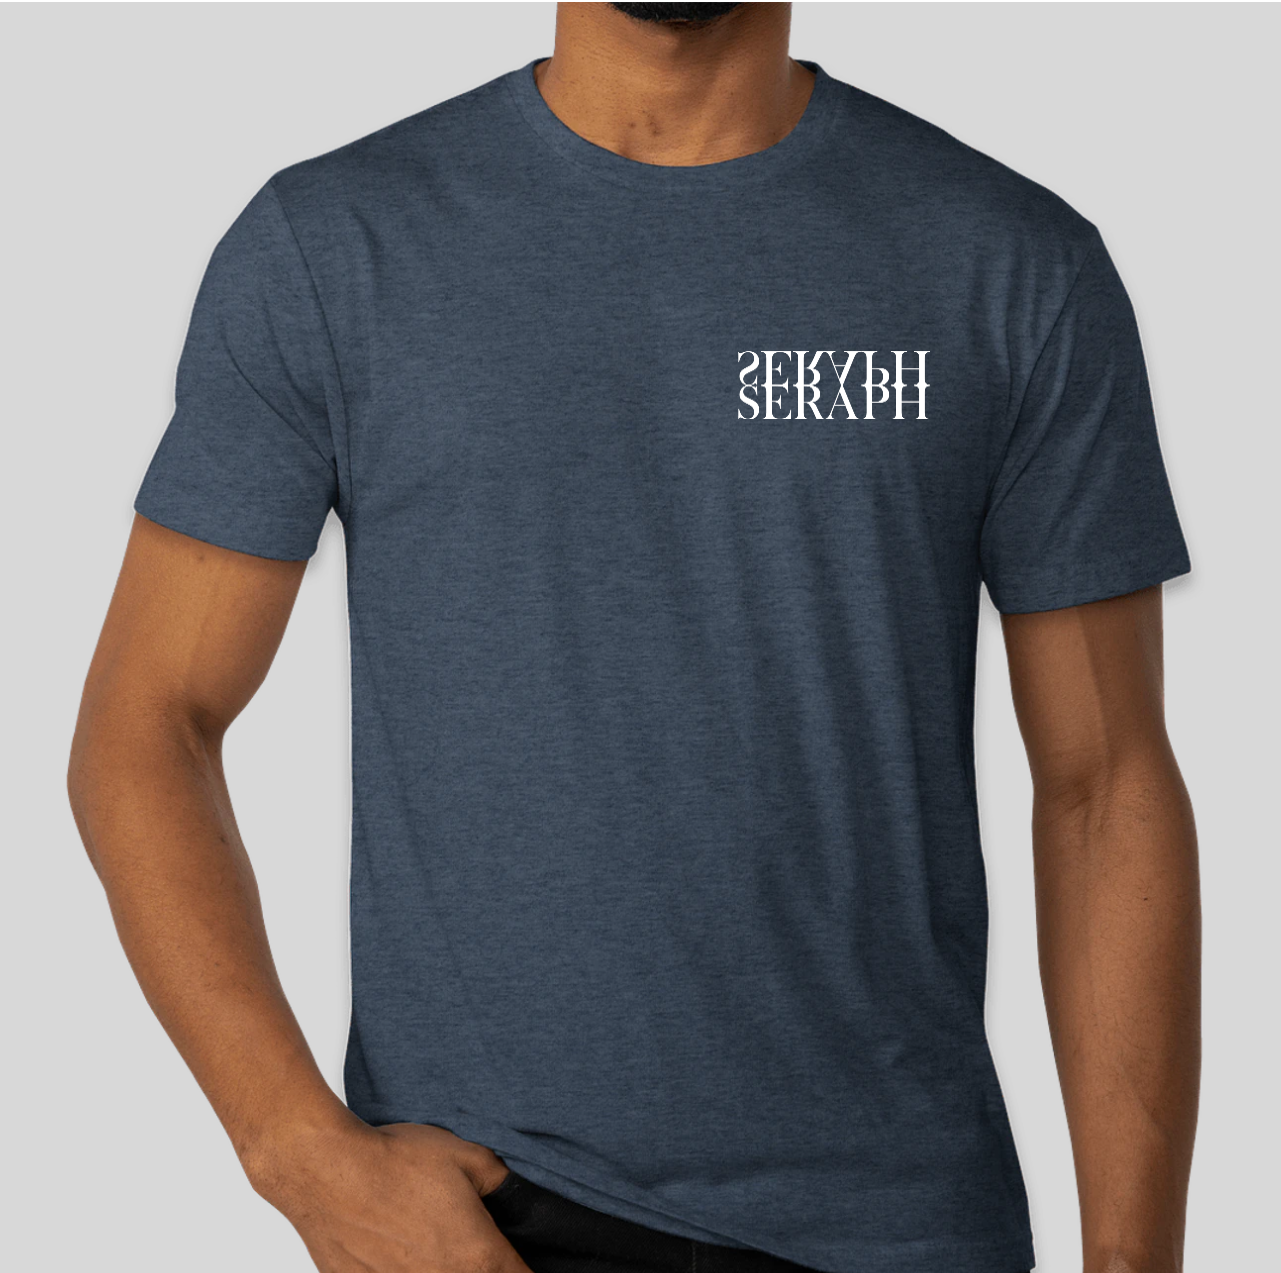 Seraph Tee (Colors Available)